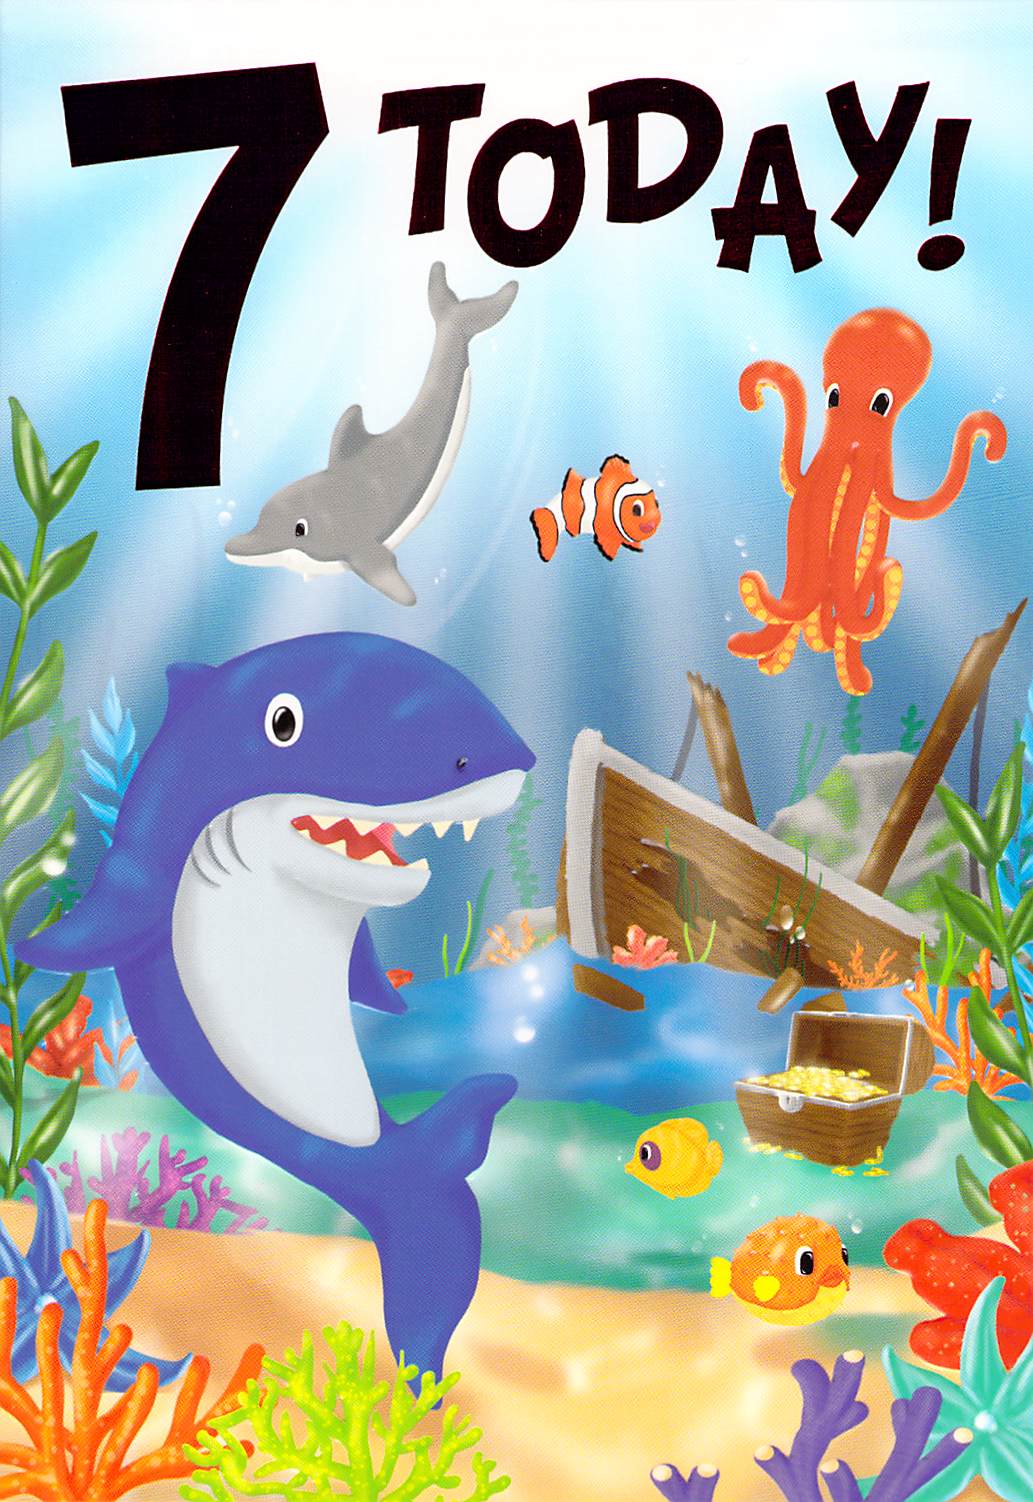 7th Birthday - Age 7 - Under The Sea - Greeting Card -Multi Buy Discount - Free P&P